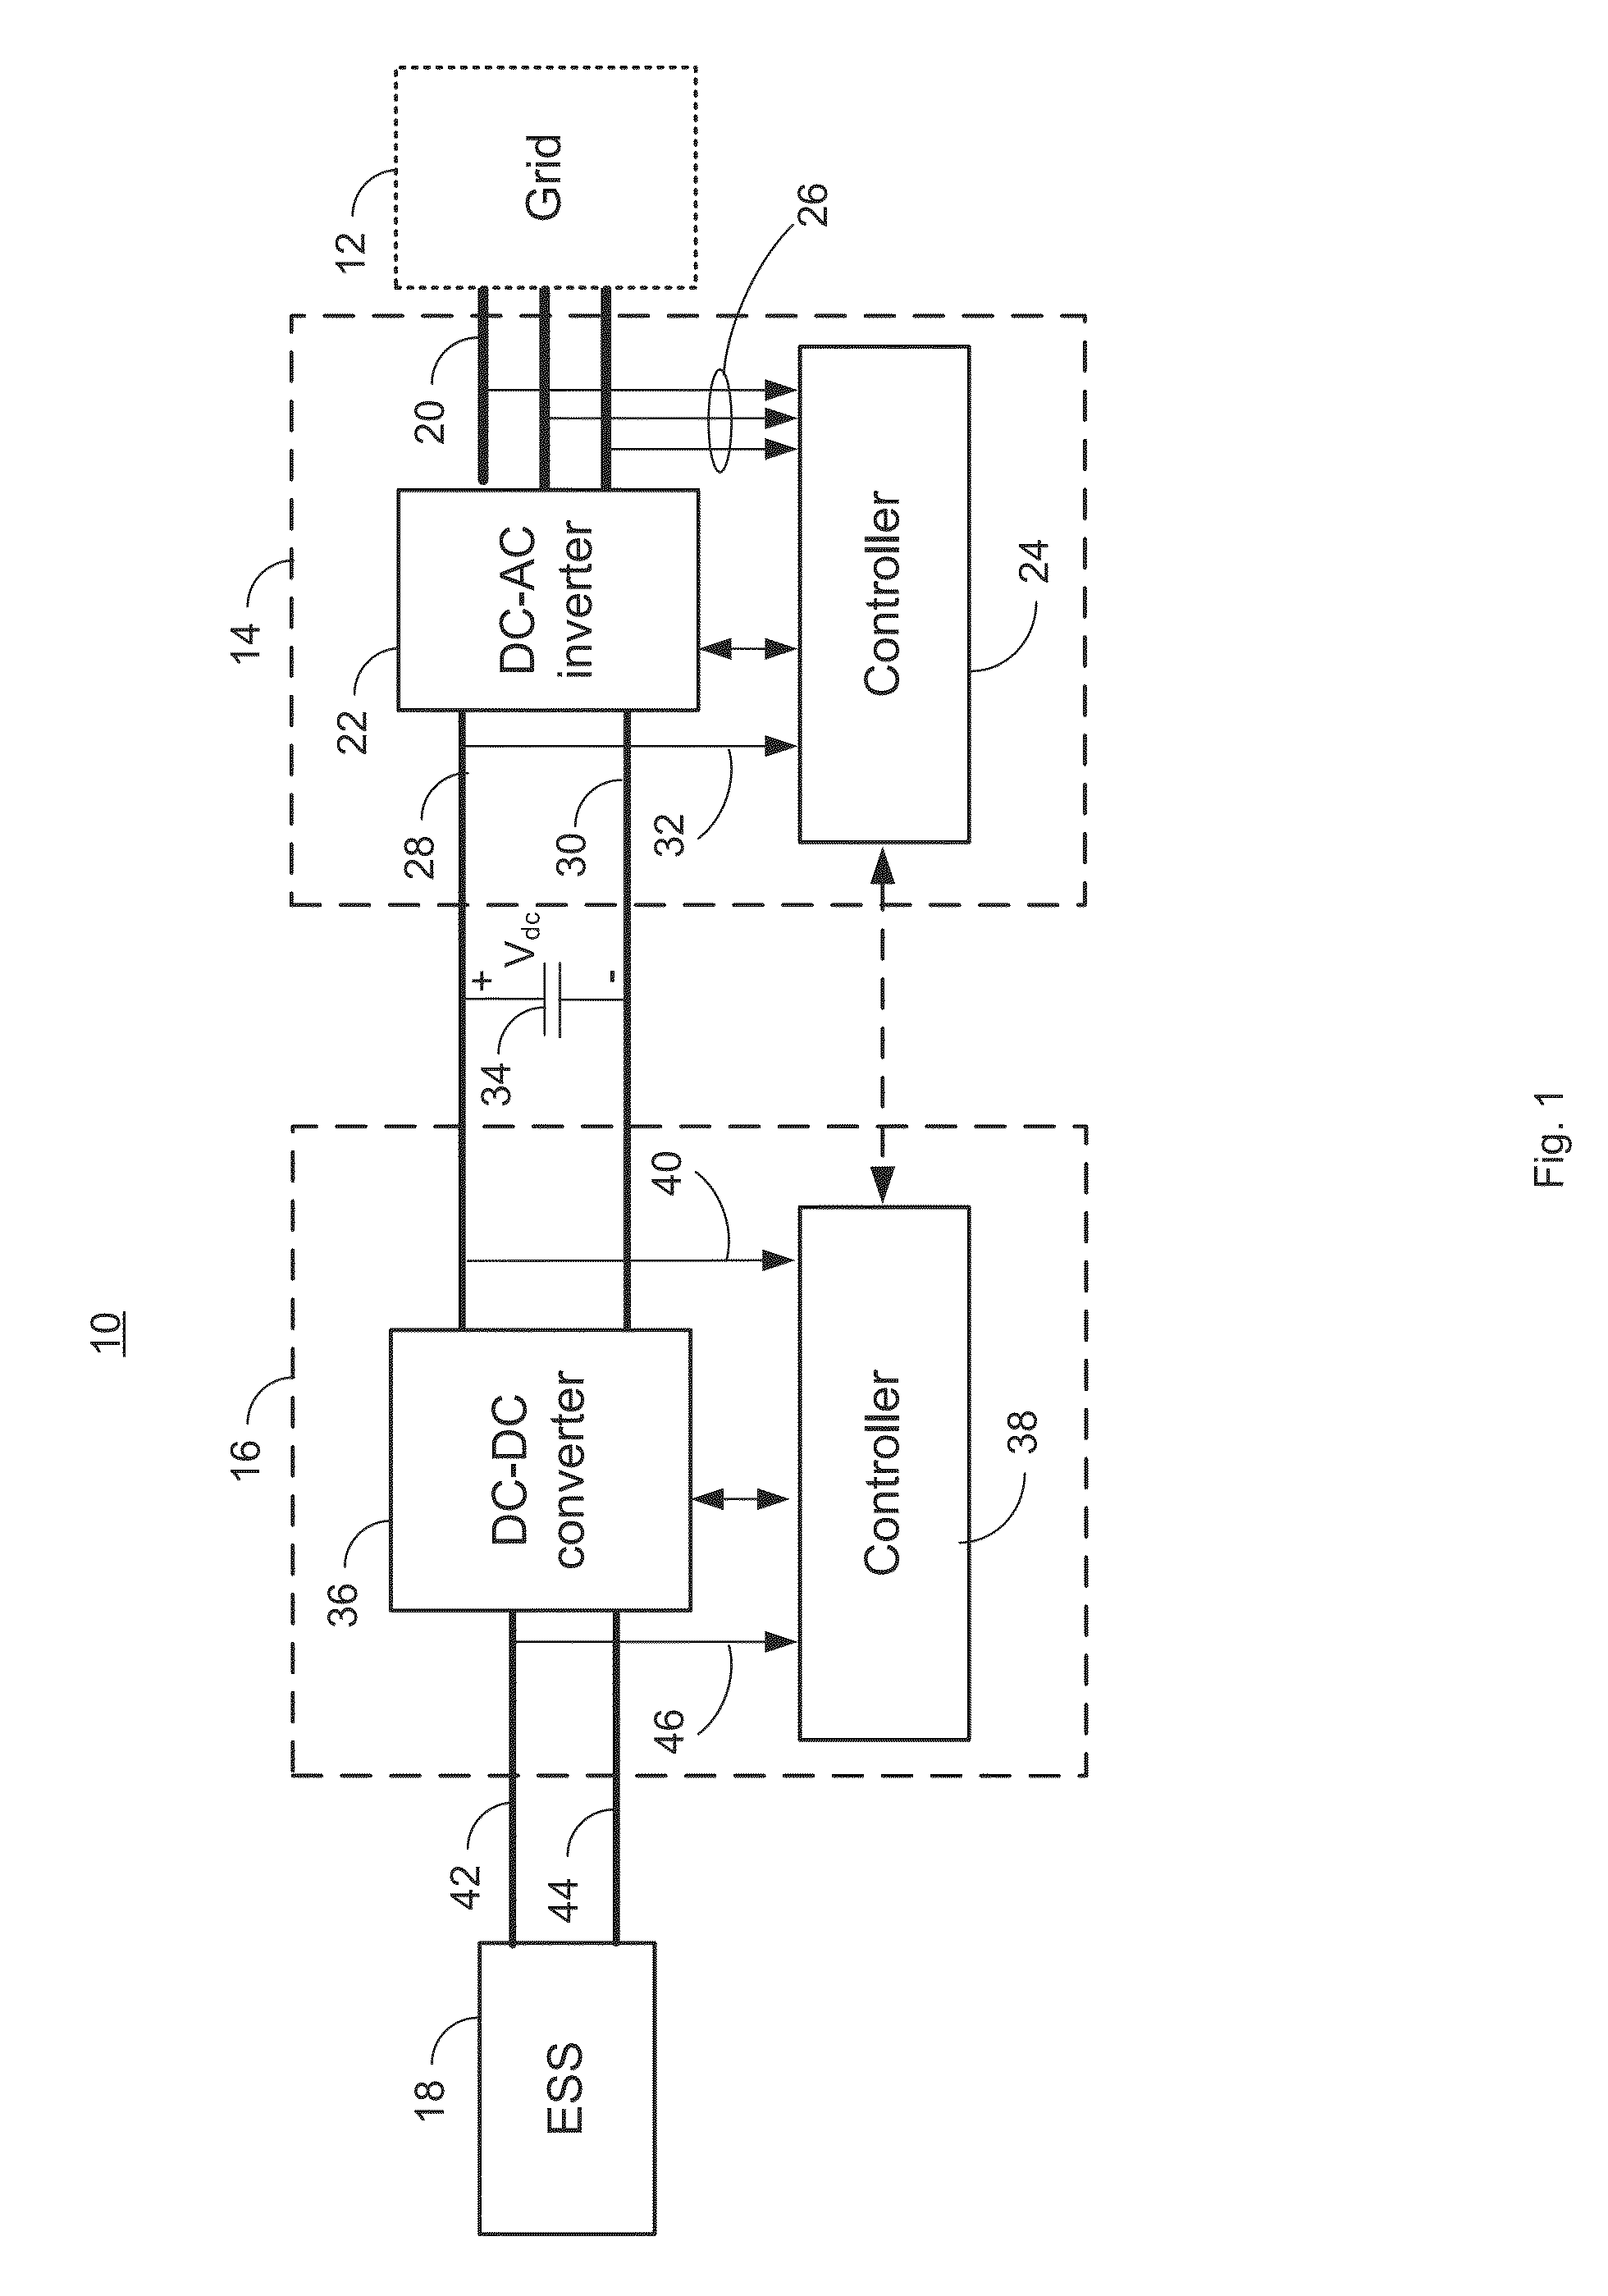 Control of energy storage system inverter system in a microgrid application